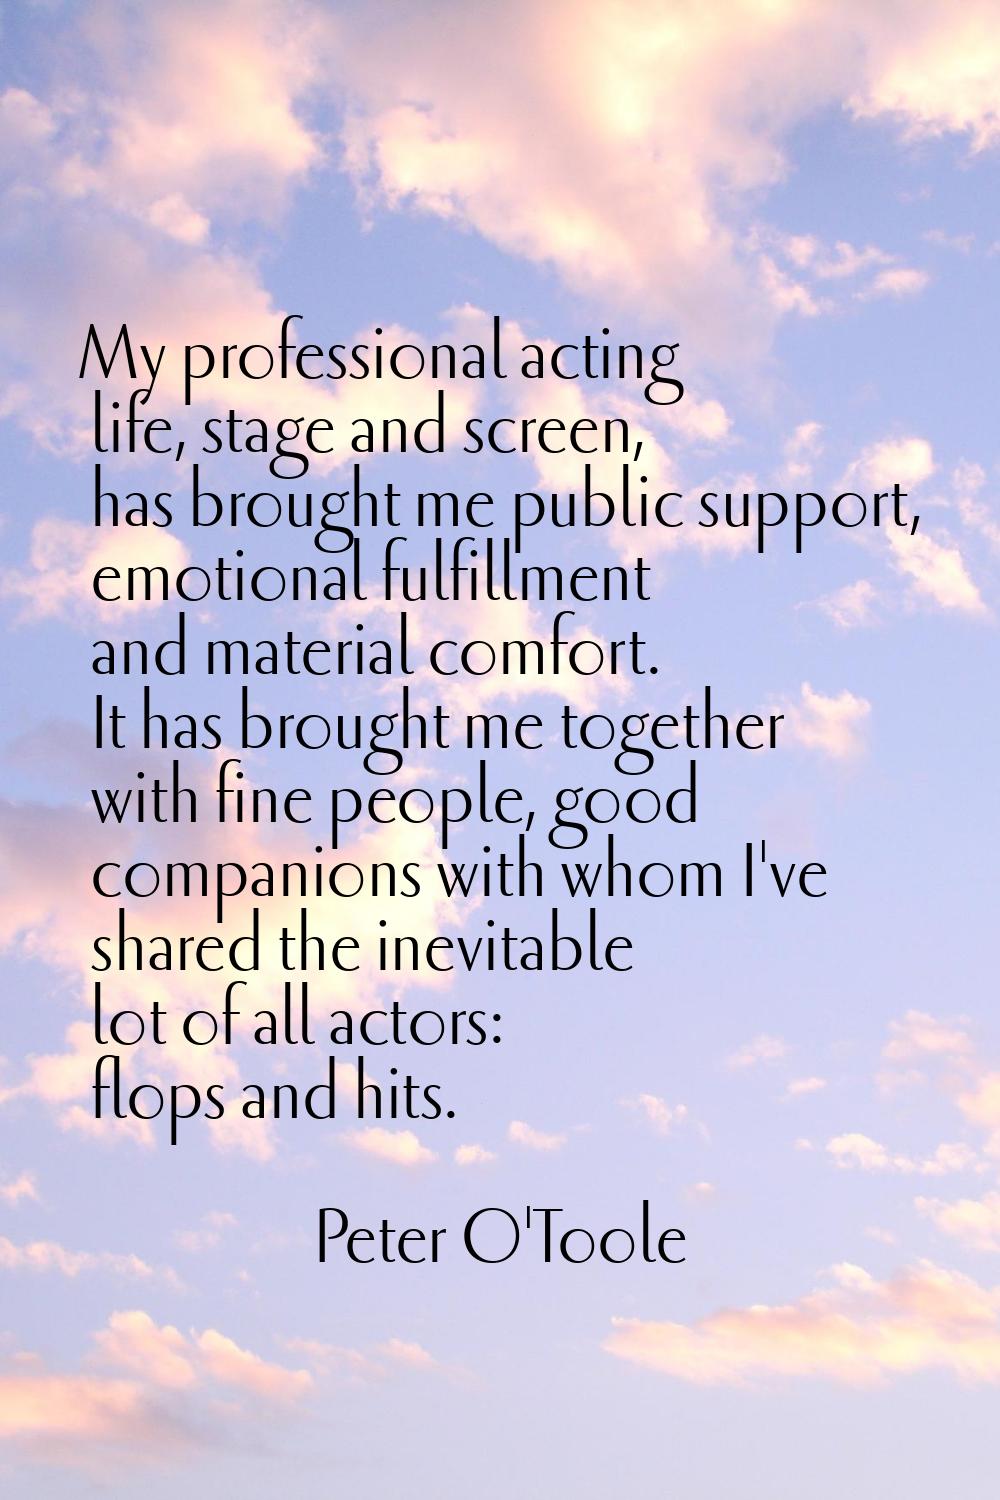 My professional acting life, stage and screen, has brought me public support, emotional fulfillment